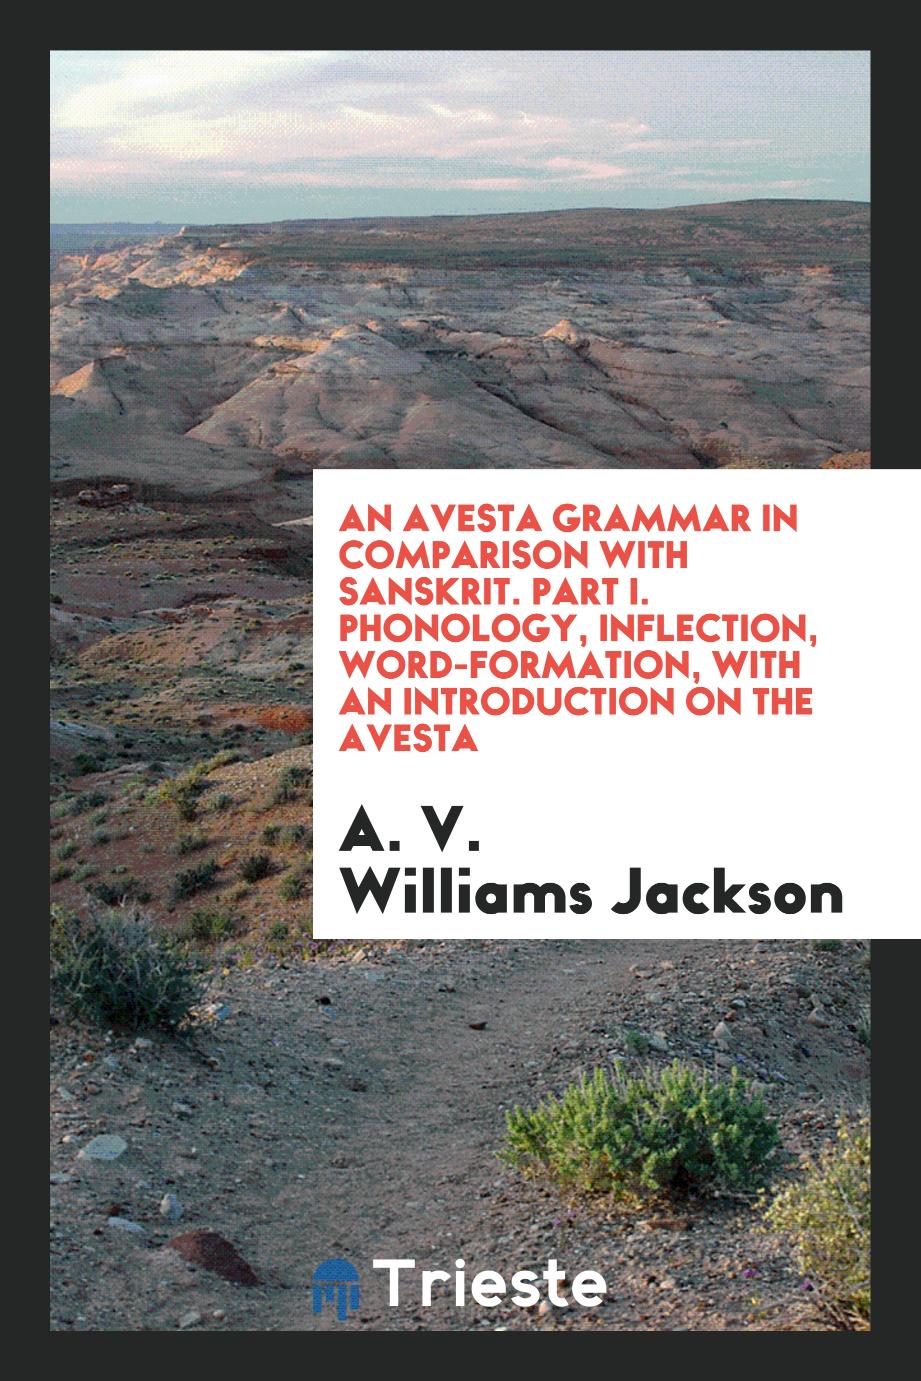 An Avesta Grammar in Comparison with Sanskrit. Part I. Phonology, Inflection, Word-Formation, with an Introduction on the Avesta